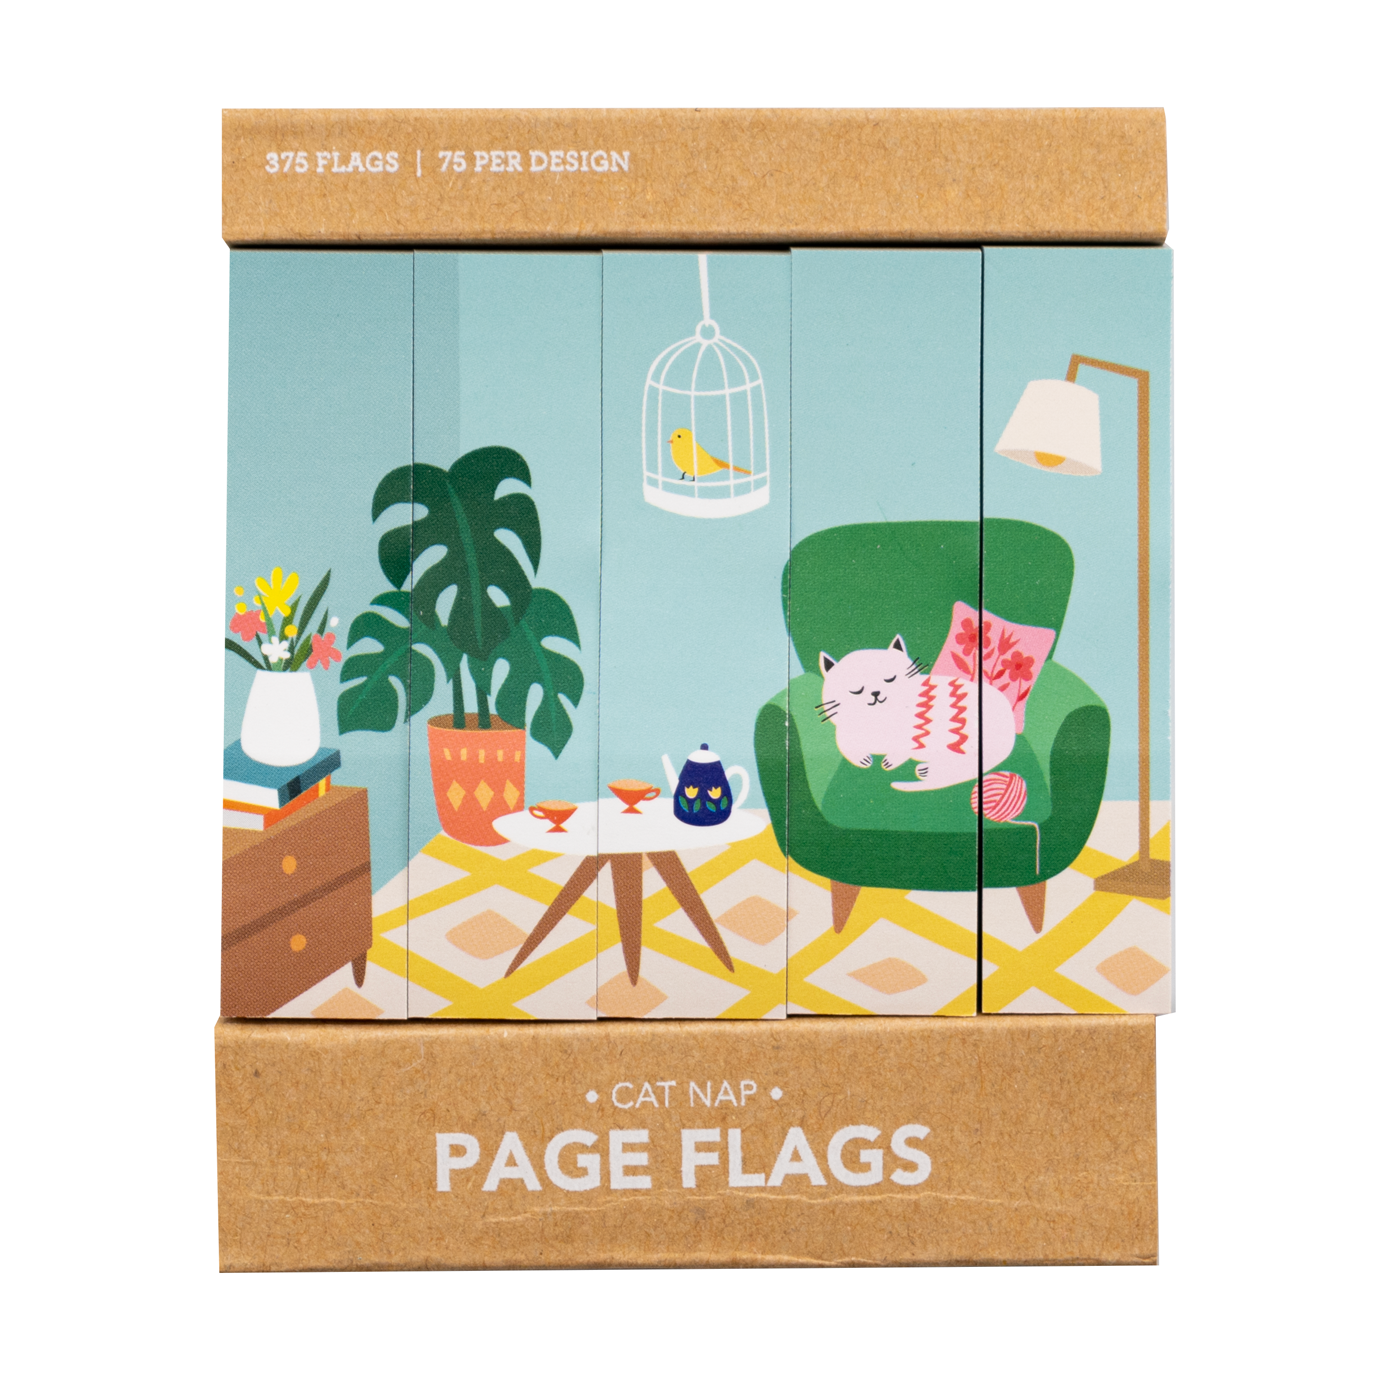 Girl of All Work - Page Flags - Adhesive flags - Cat Nap